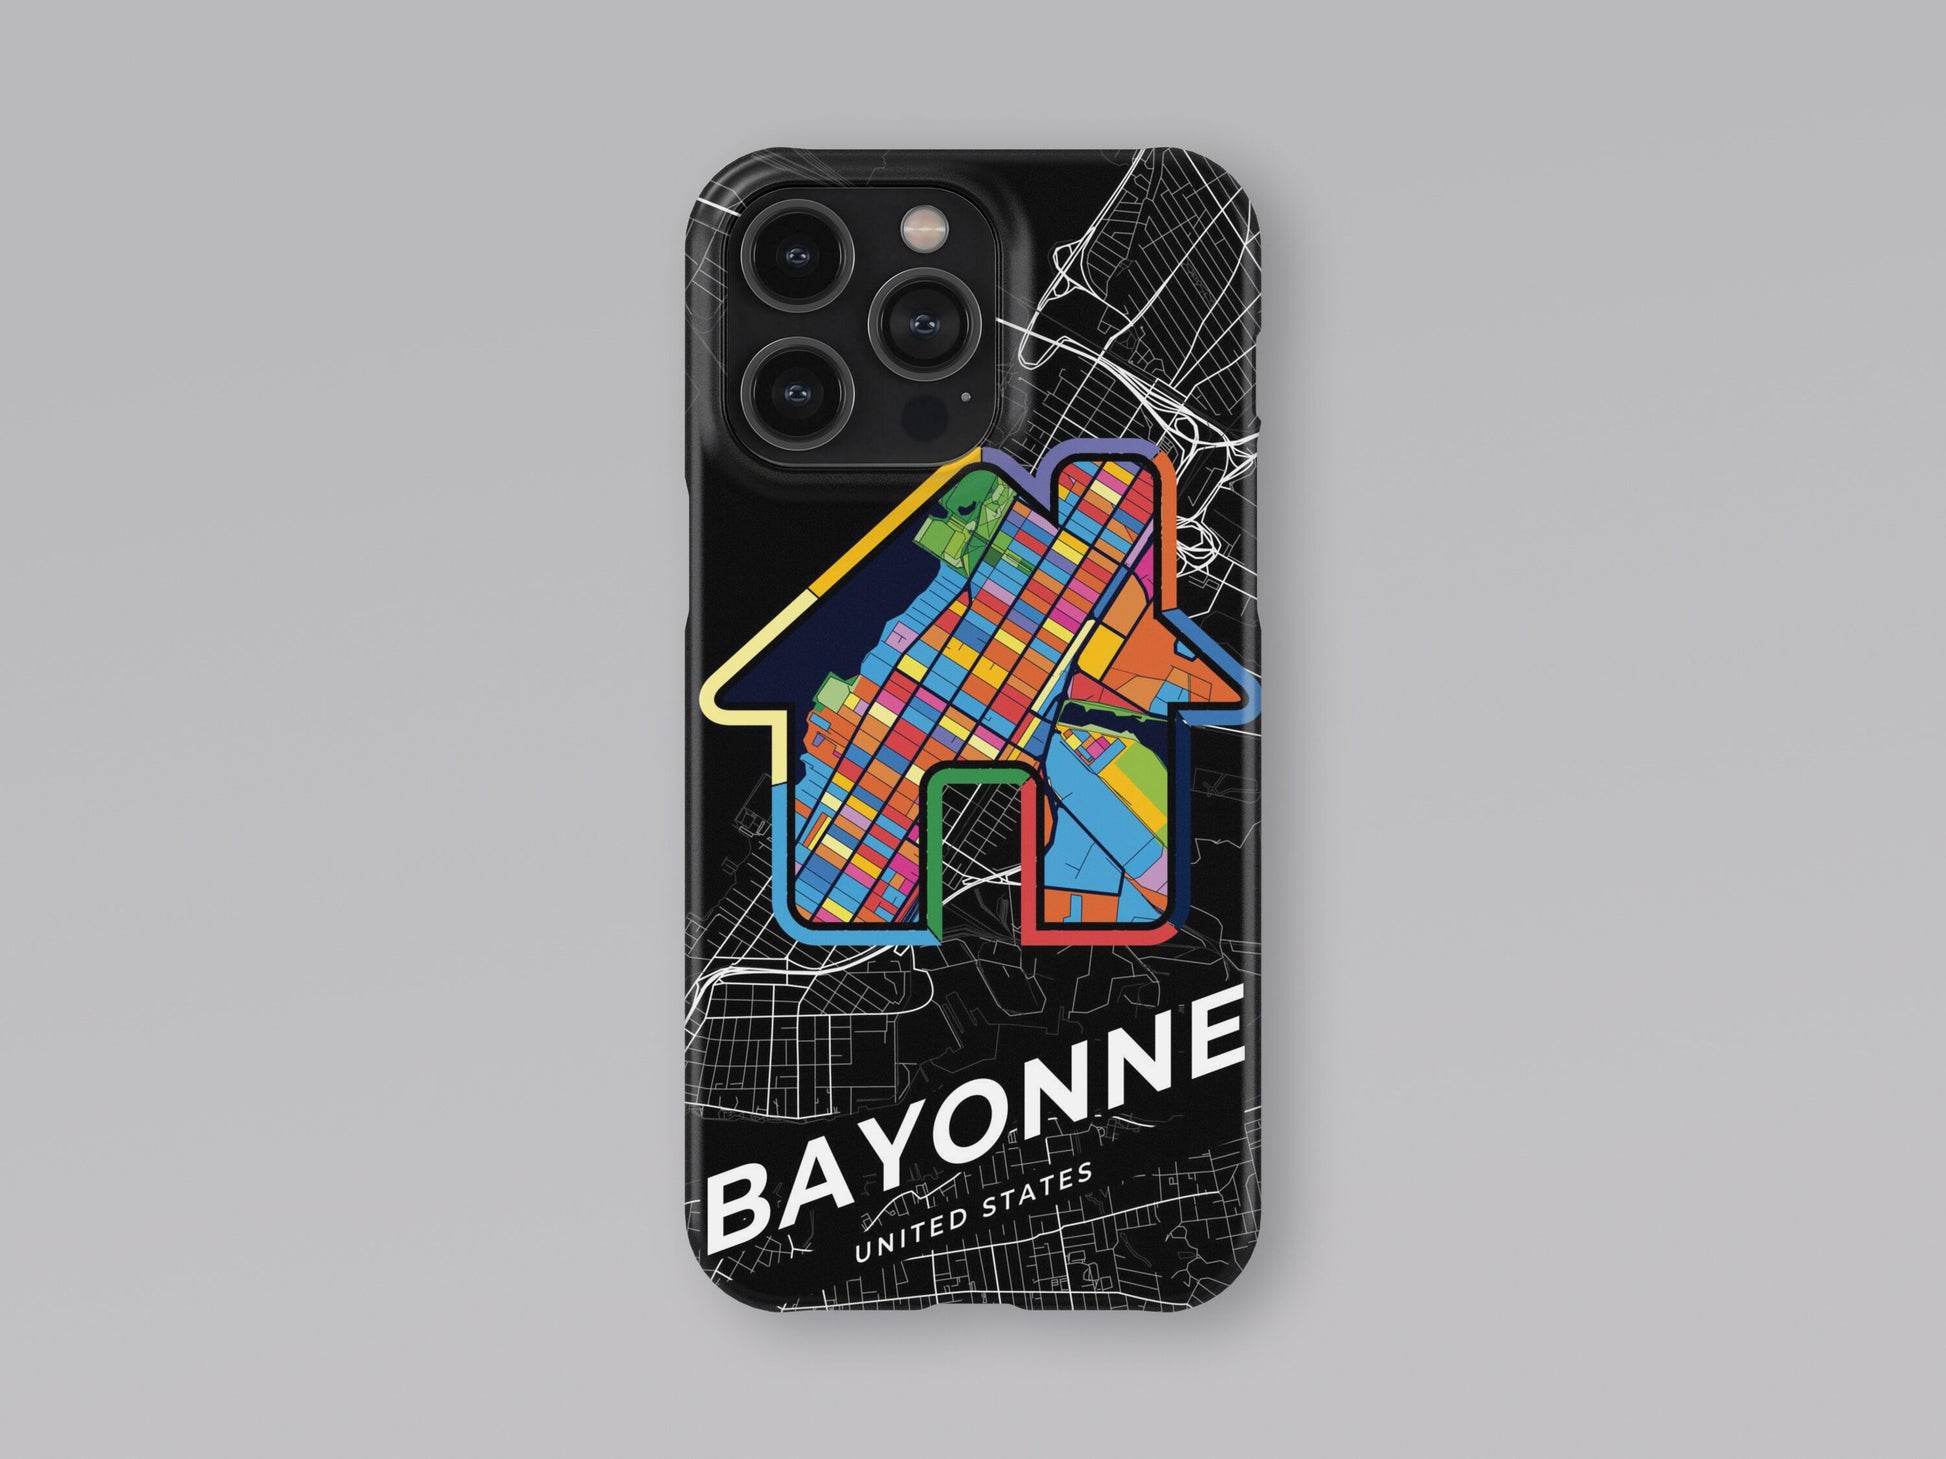 Bayonne New Jersey slim phone case with colorful icon. Birthday, wedding or housewarming gift. Couple match cases. 3